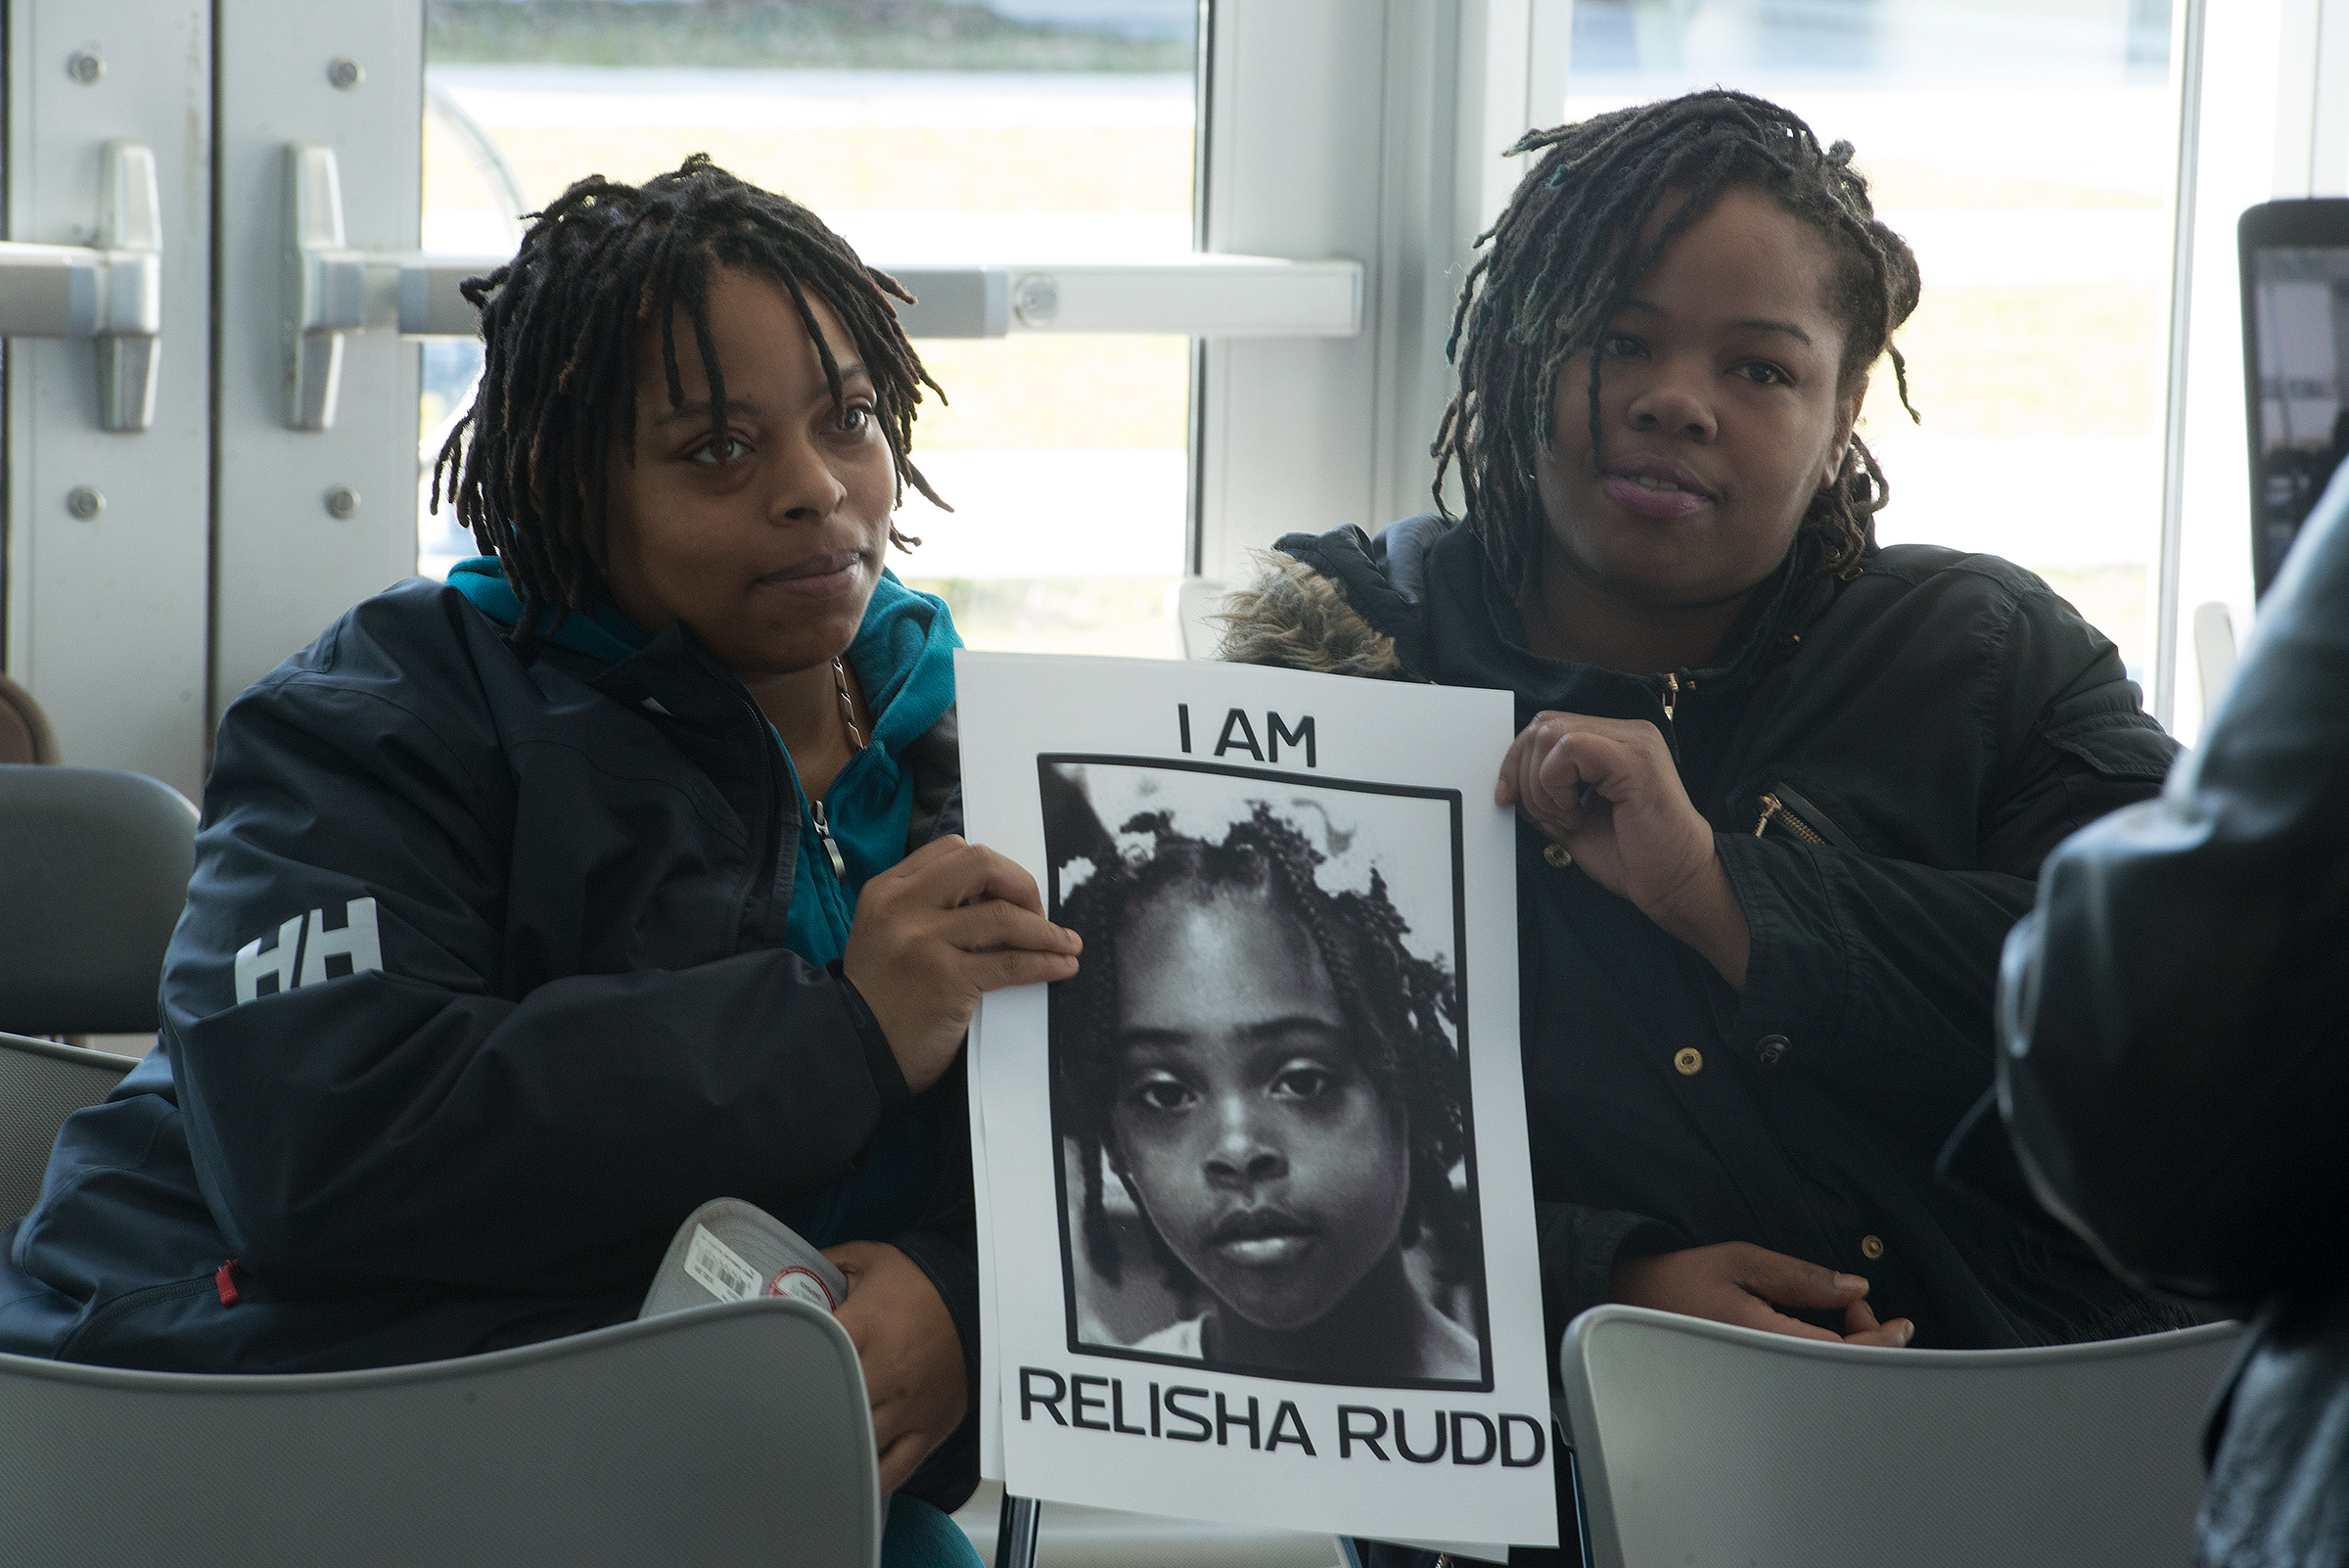 Shamika Young, left, Relisha's mother, and Shamika's godsister Kinnicia Williams attend a remembrance celebration of Relisha Rudd at the Deanwood Recreation Center in Washington, D.C. on Feb. 27, 2016. (Marvin Joseph—The Washington Post/Getty Images)